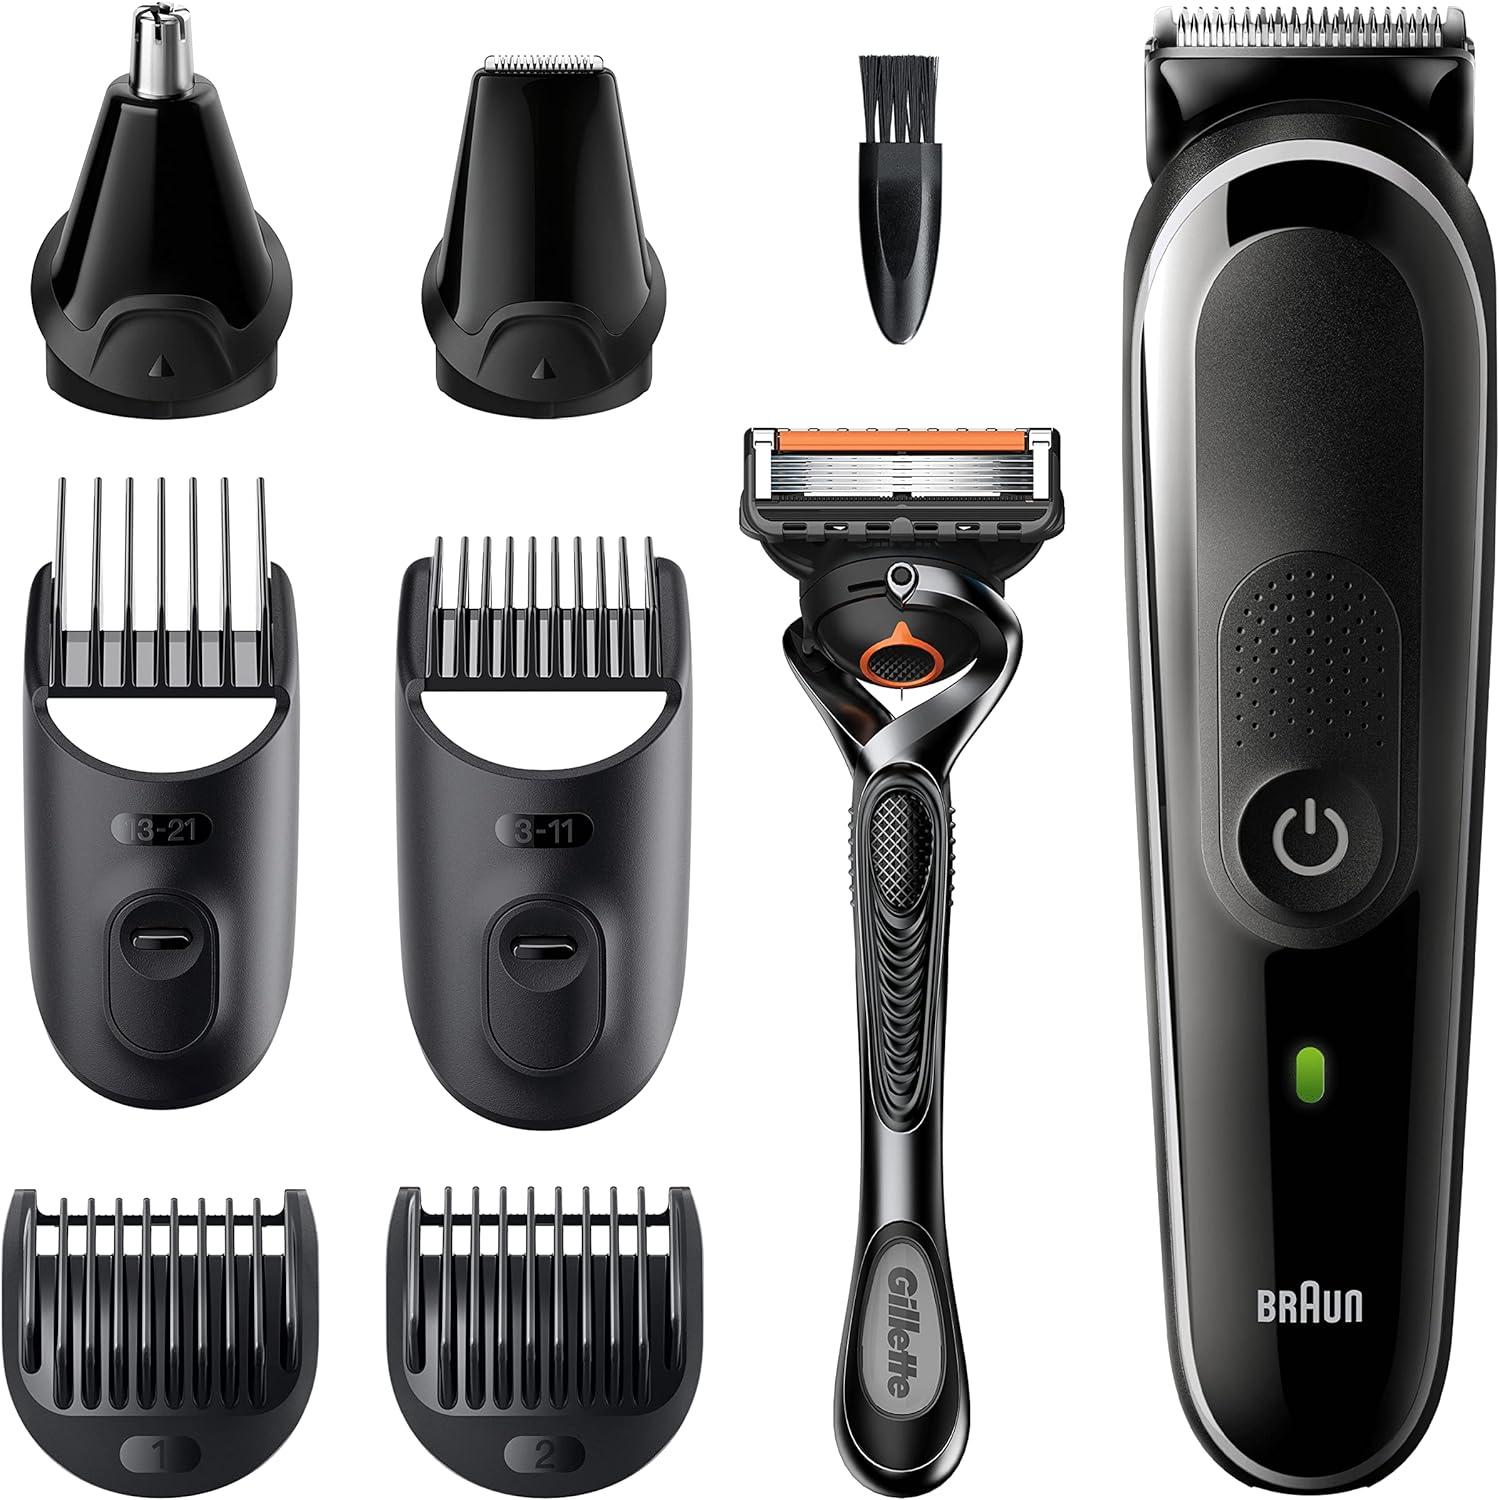 Grooming 2 Gifts With Clippers Attachments Male Ear 6 Black/Grey Razor All-In-One Trimmer 8-In-1 MGK5260 Gillette UK Plug Nose & Braun Series & Men Hair For Beard Trimmer Kit 5 Pin